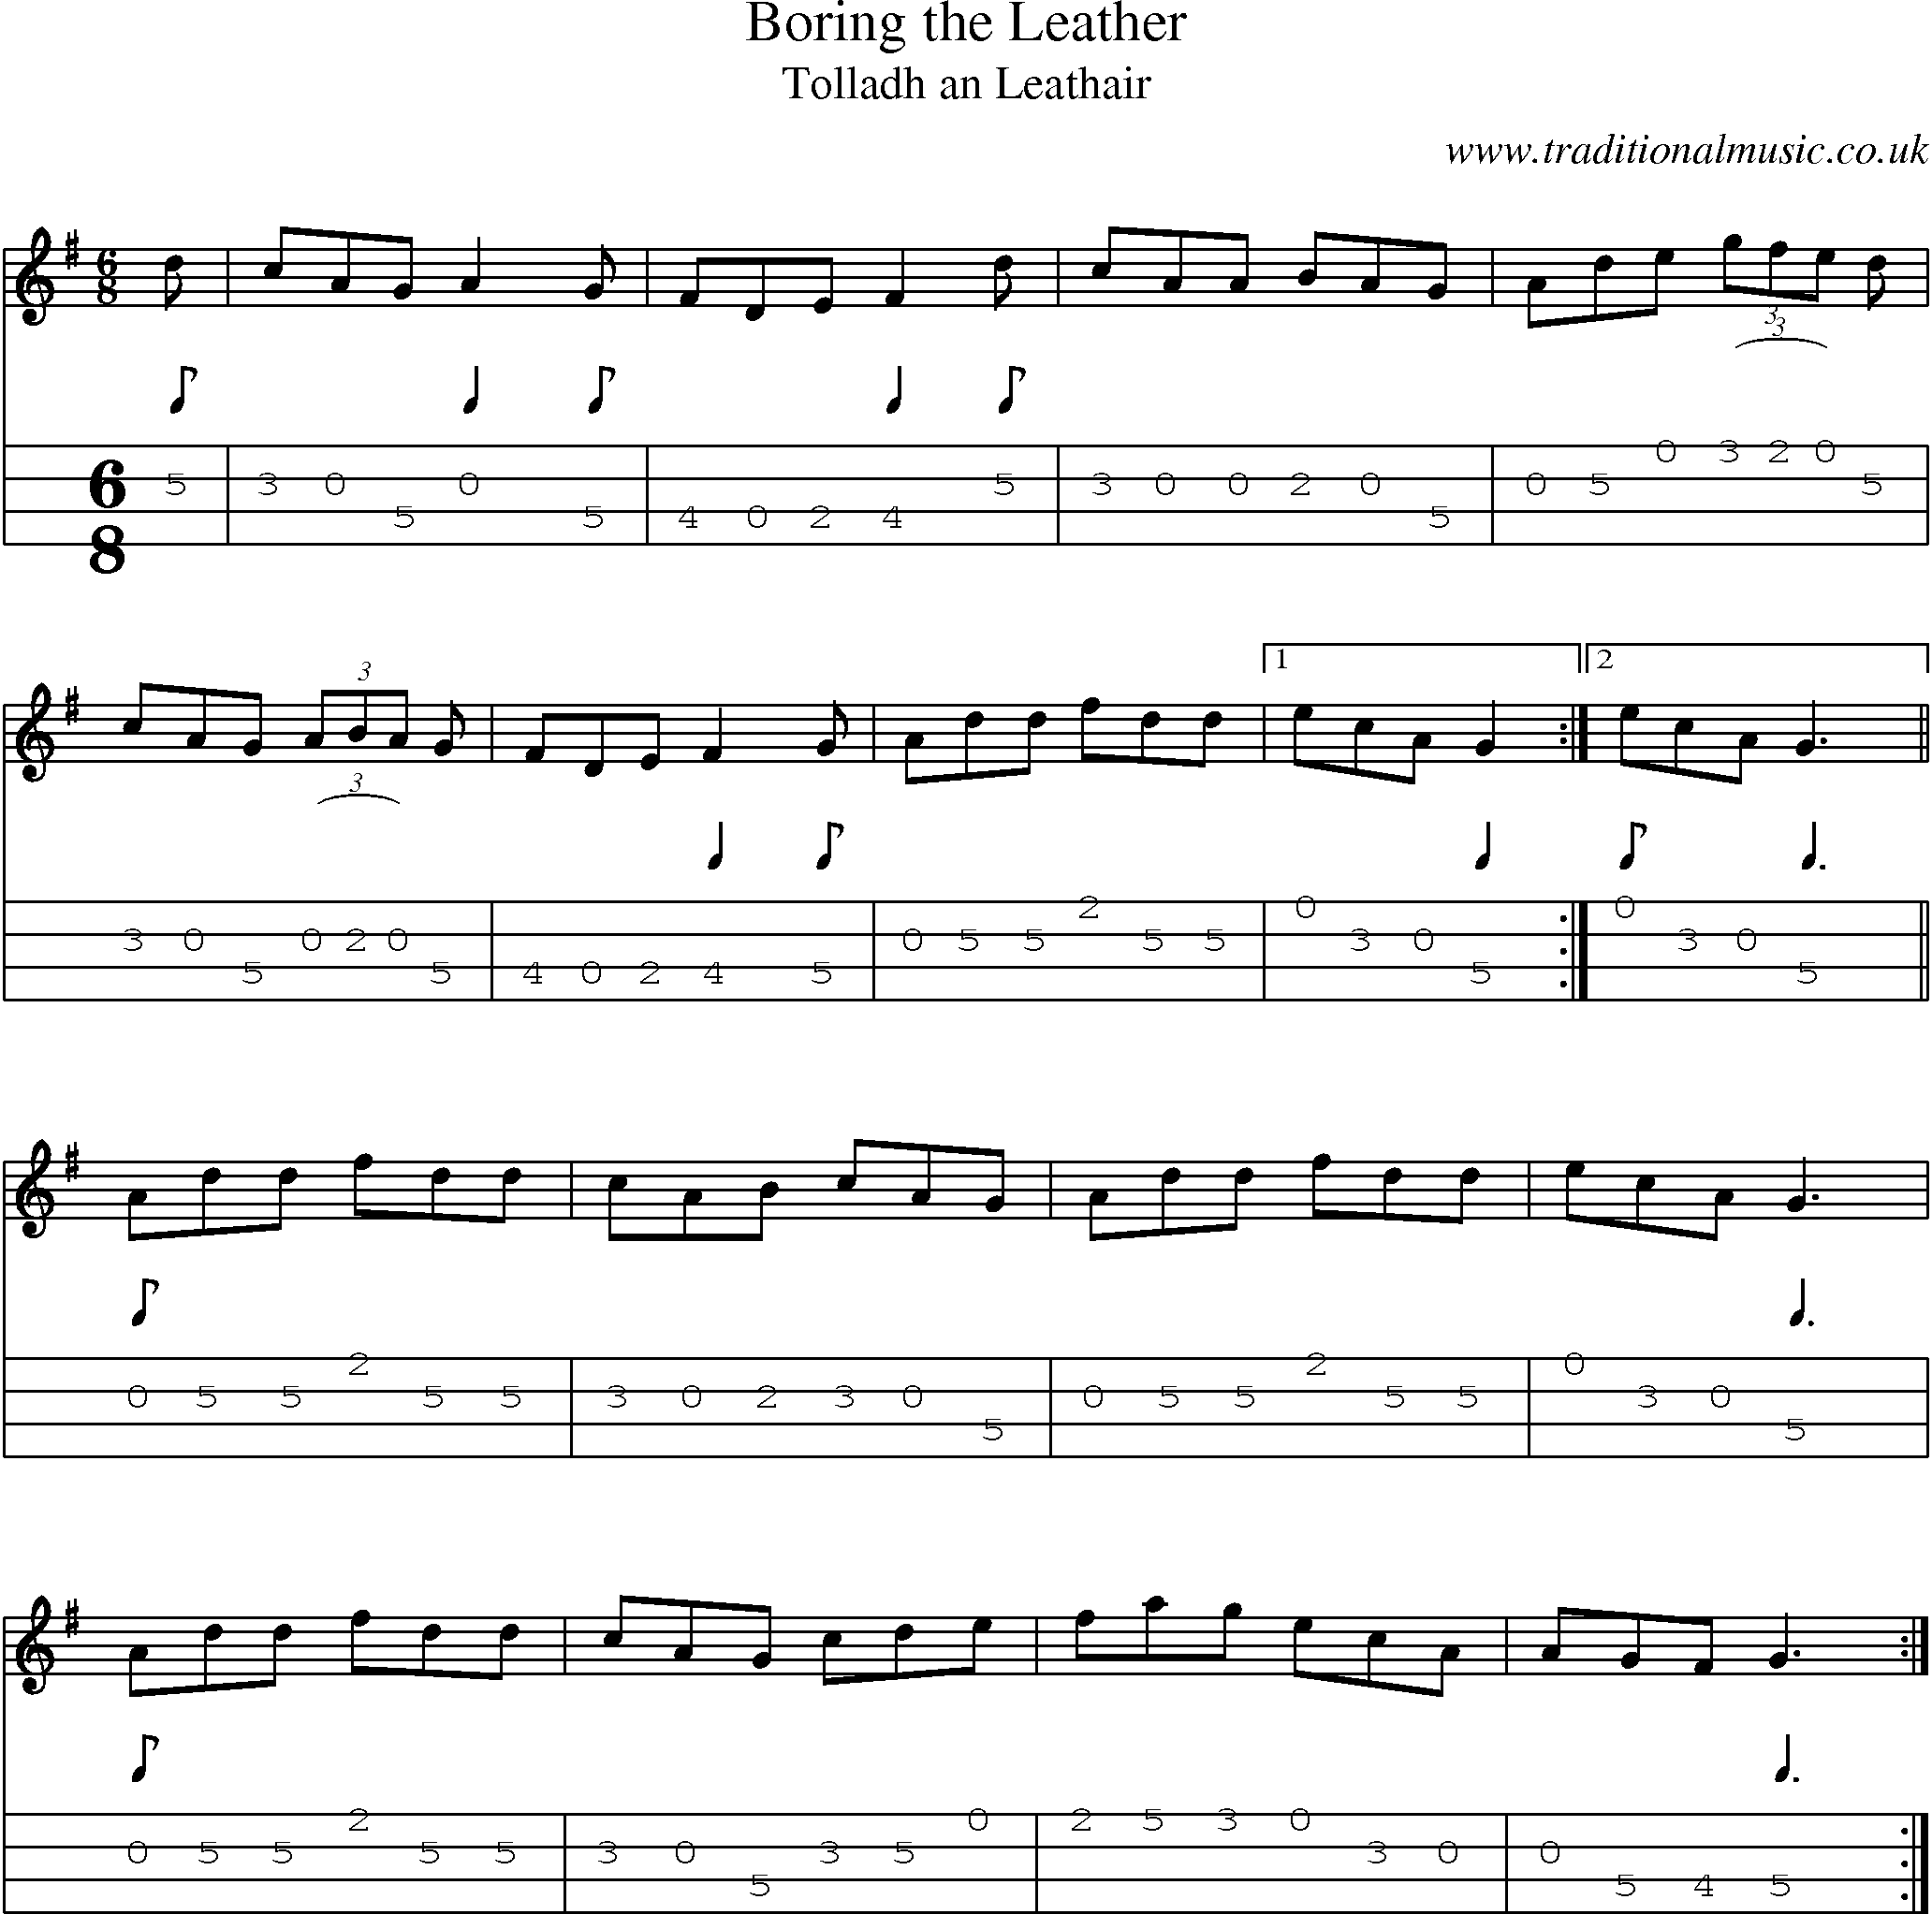 Music Score and Mandolin Tabs for Boring Leather